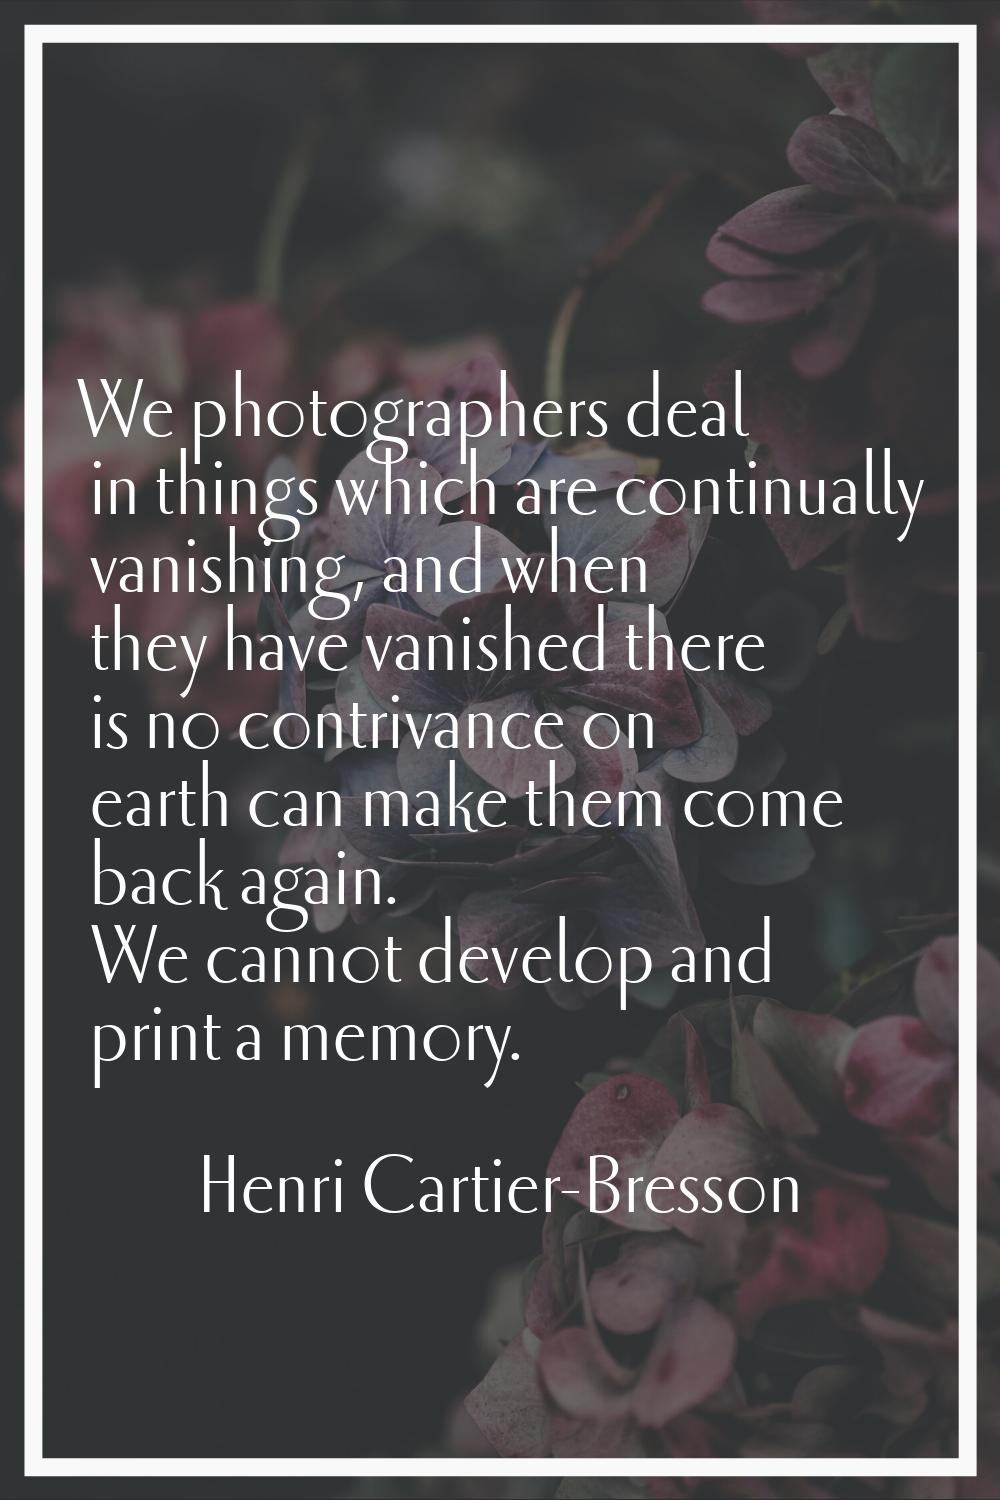 We photographers deal in things which are continually vanishing, and when they have vanished there 